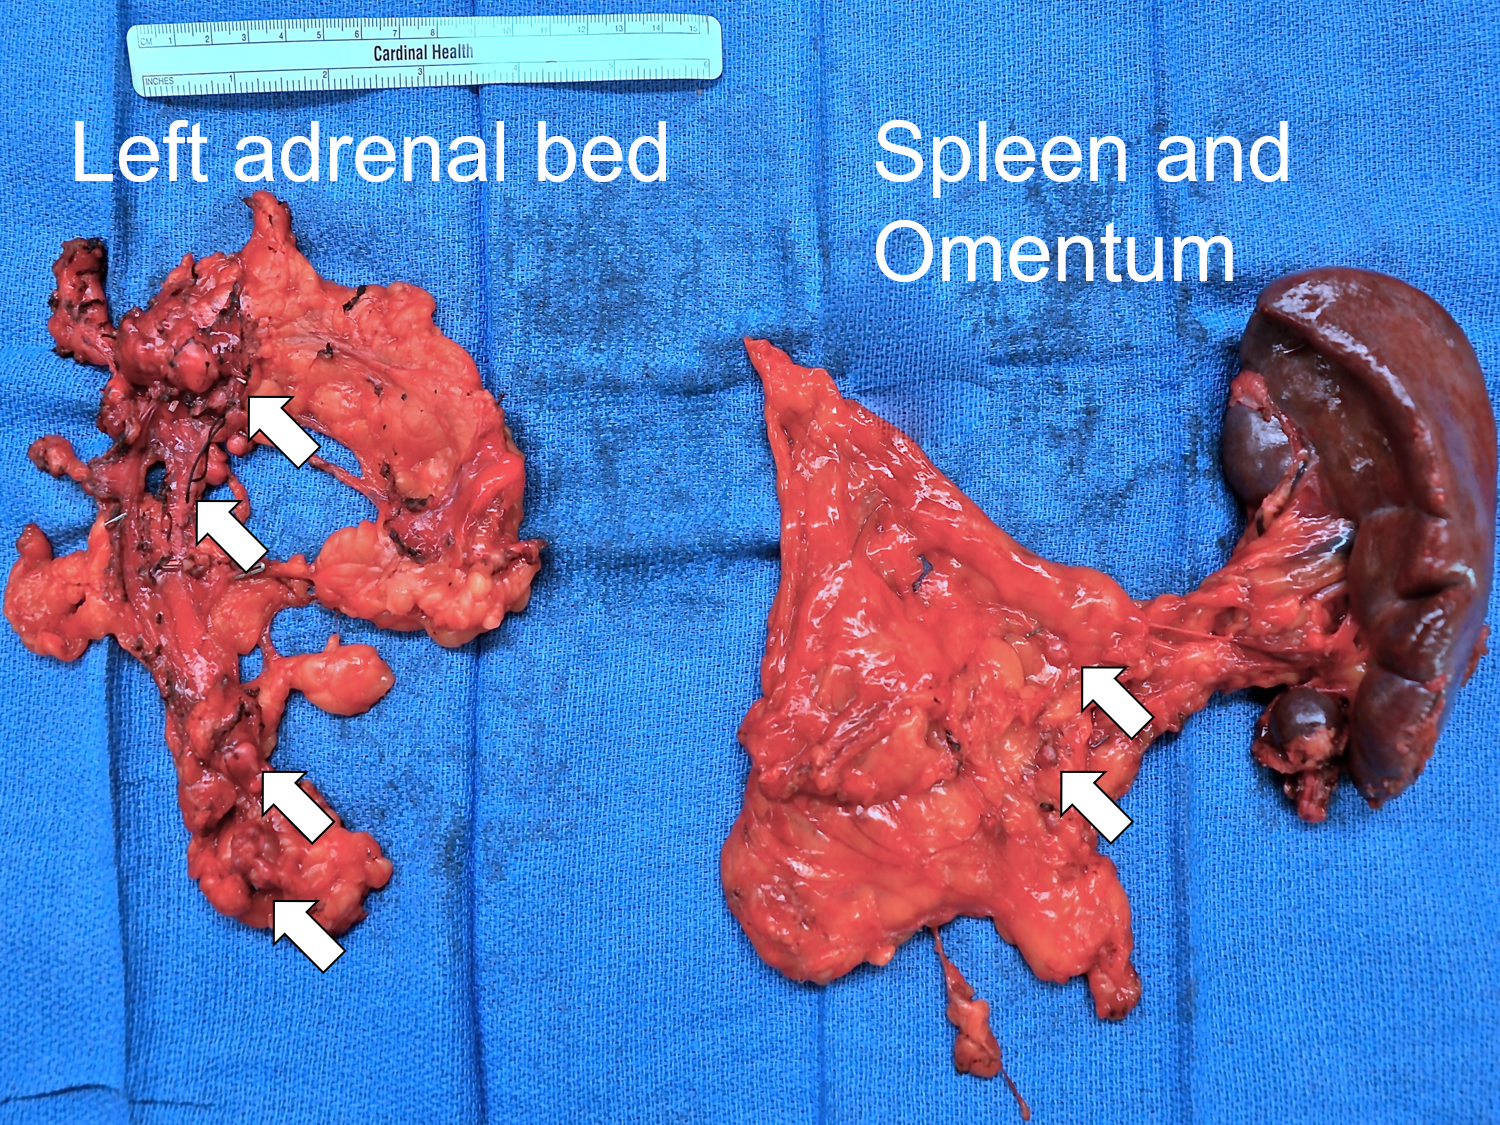 Removed tissue after an open, old-fashioned reoperation for pheochromocytoma tumor spilled throughout the abdomen (called “pheochromocytomatosis”) at the initial operation 15 years prior at an outside institution.